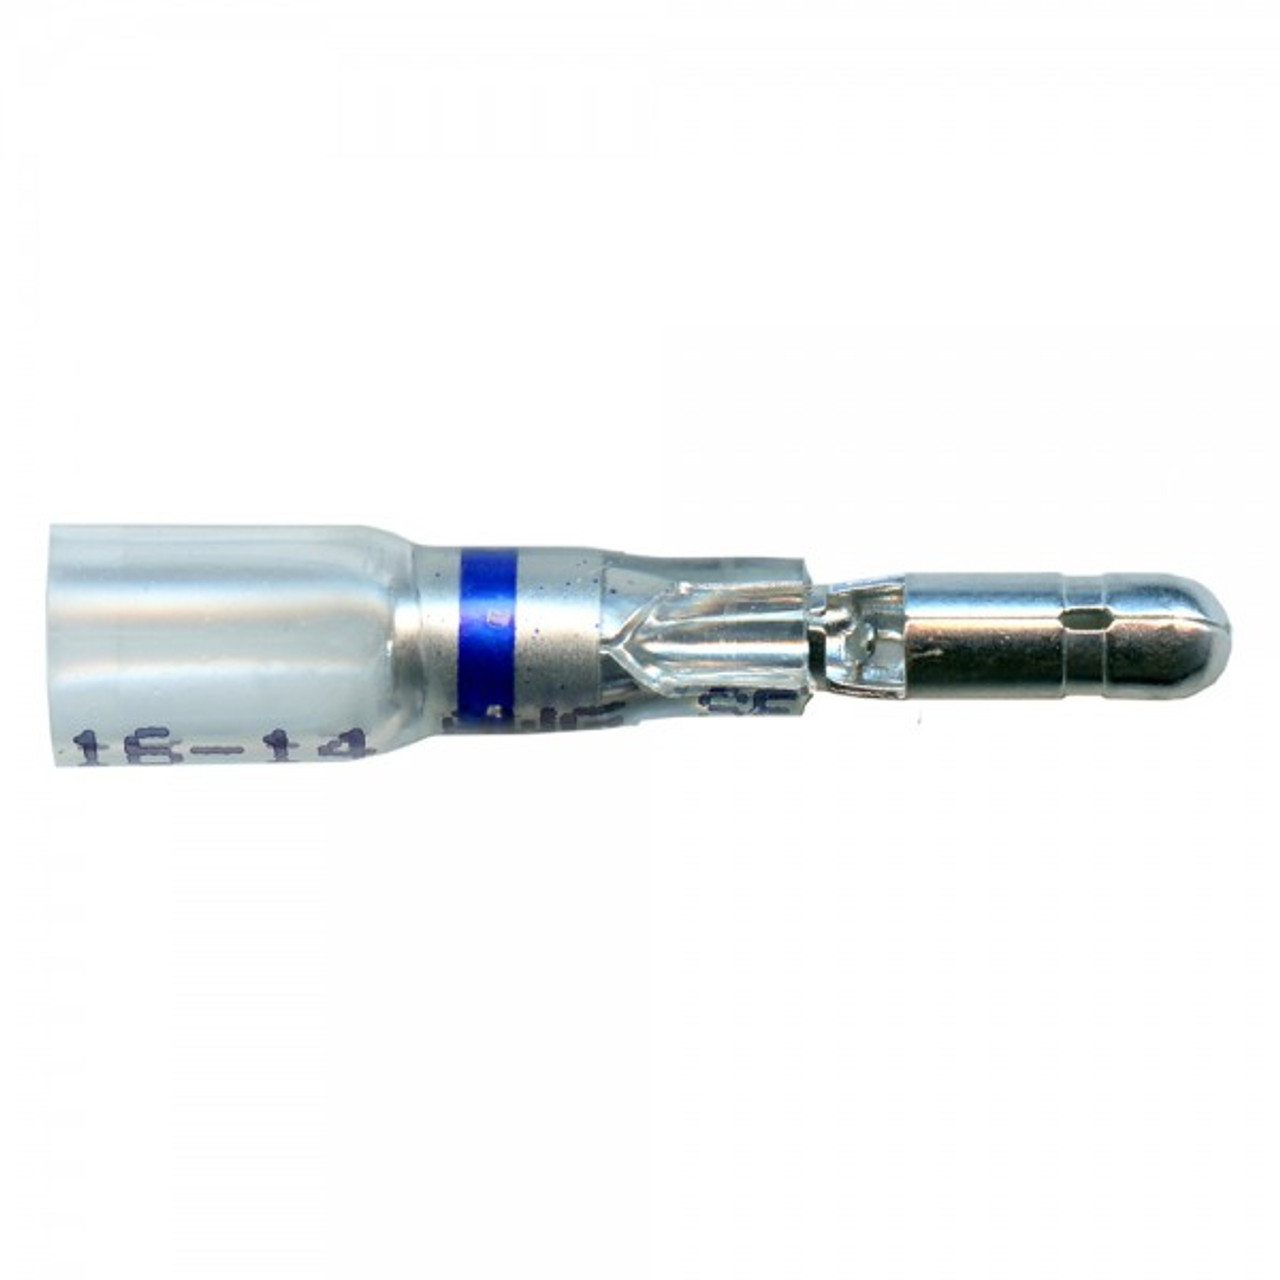 16 - 14 AWG Heat Shrinkable Bullet & Receptacle Connectors .180" @ 15 Pack - Clear w/Blue stripe  84-4447